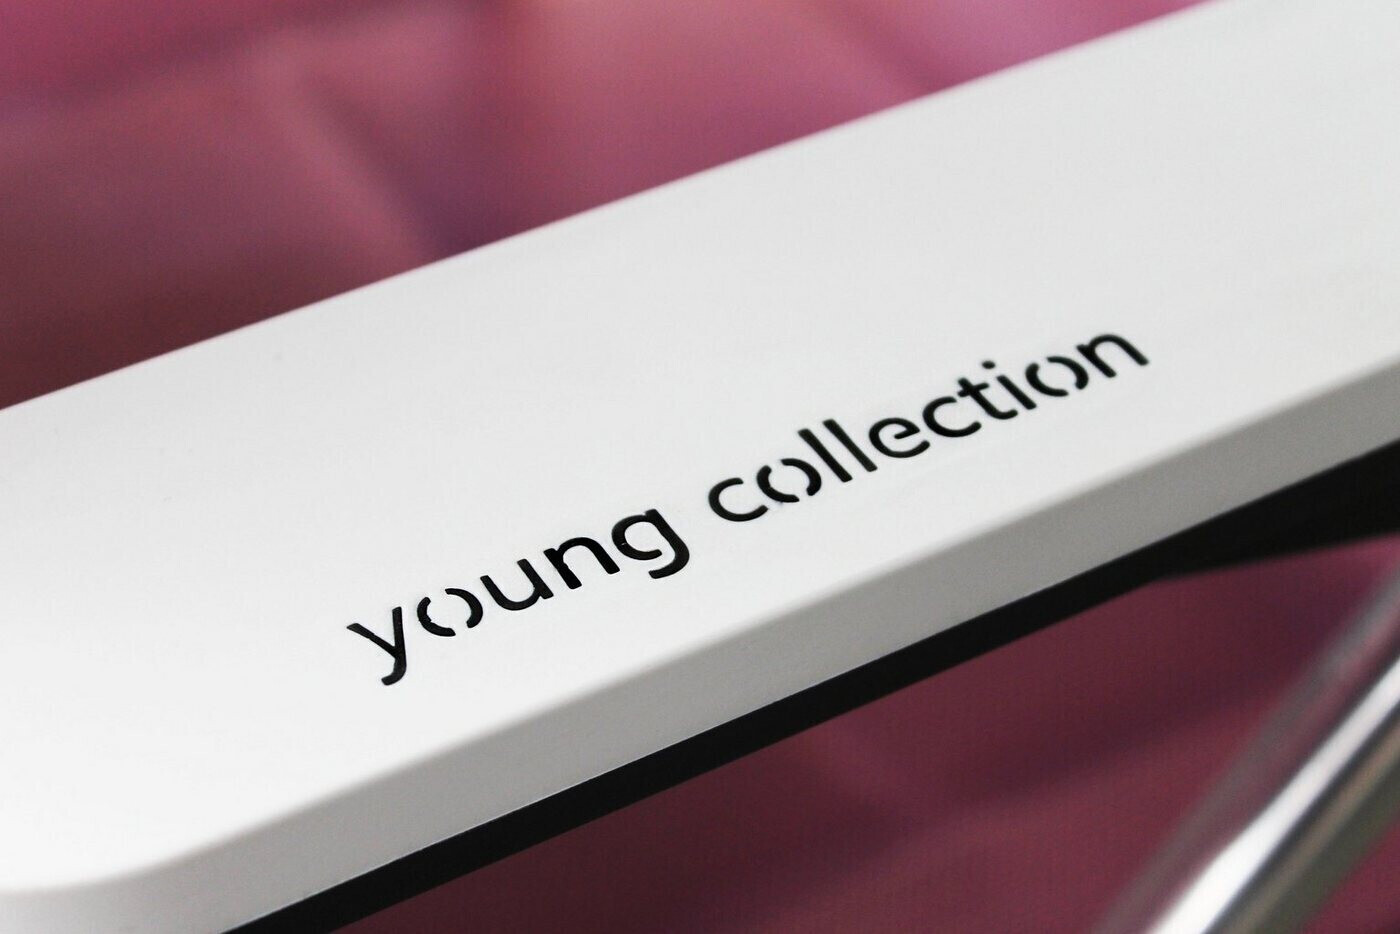 Best Young Collection | bei Preisvergleich (44558132) 109,98 ab lila €